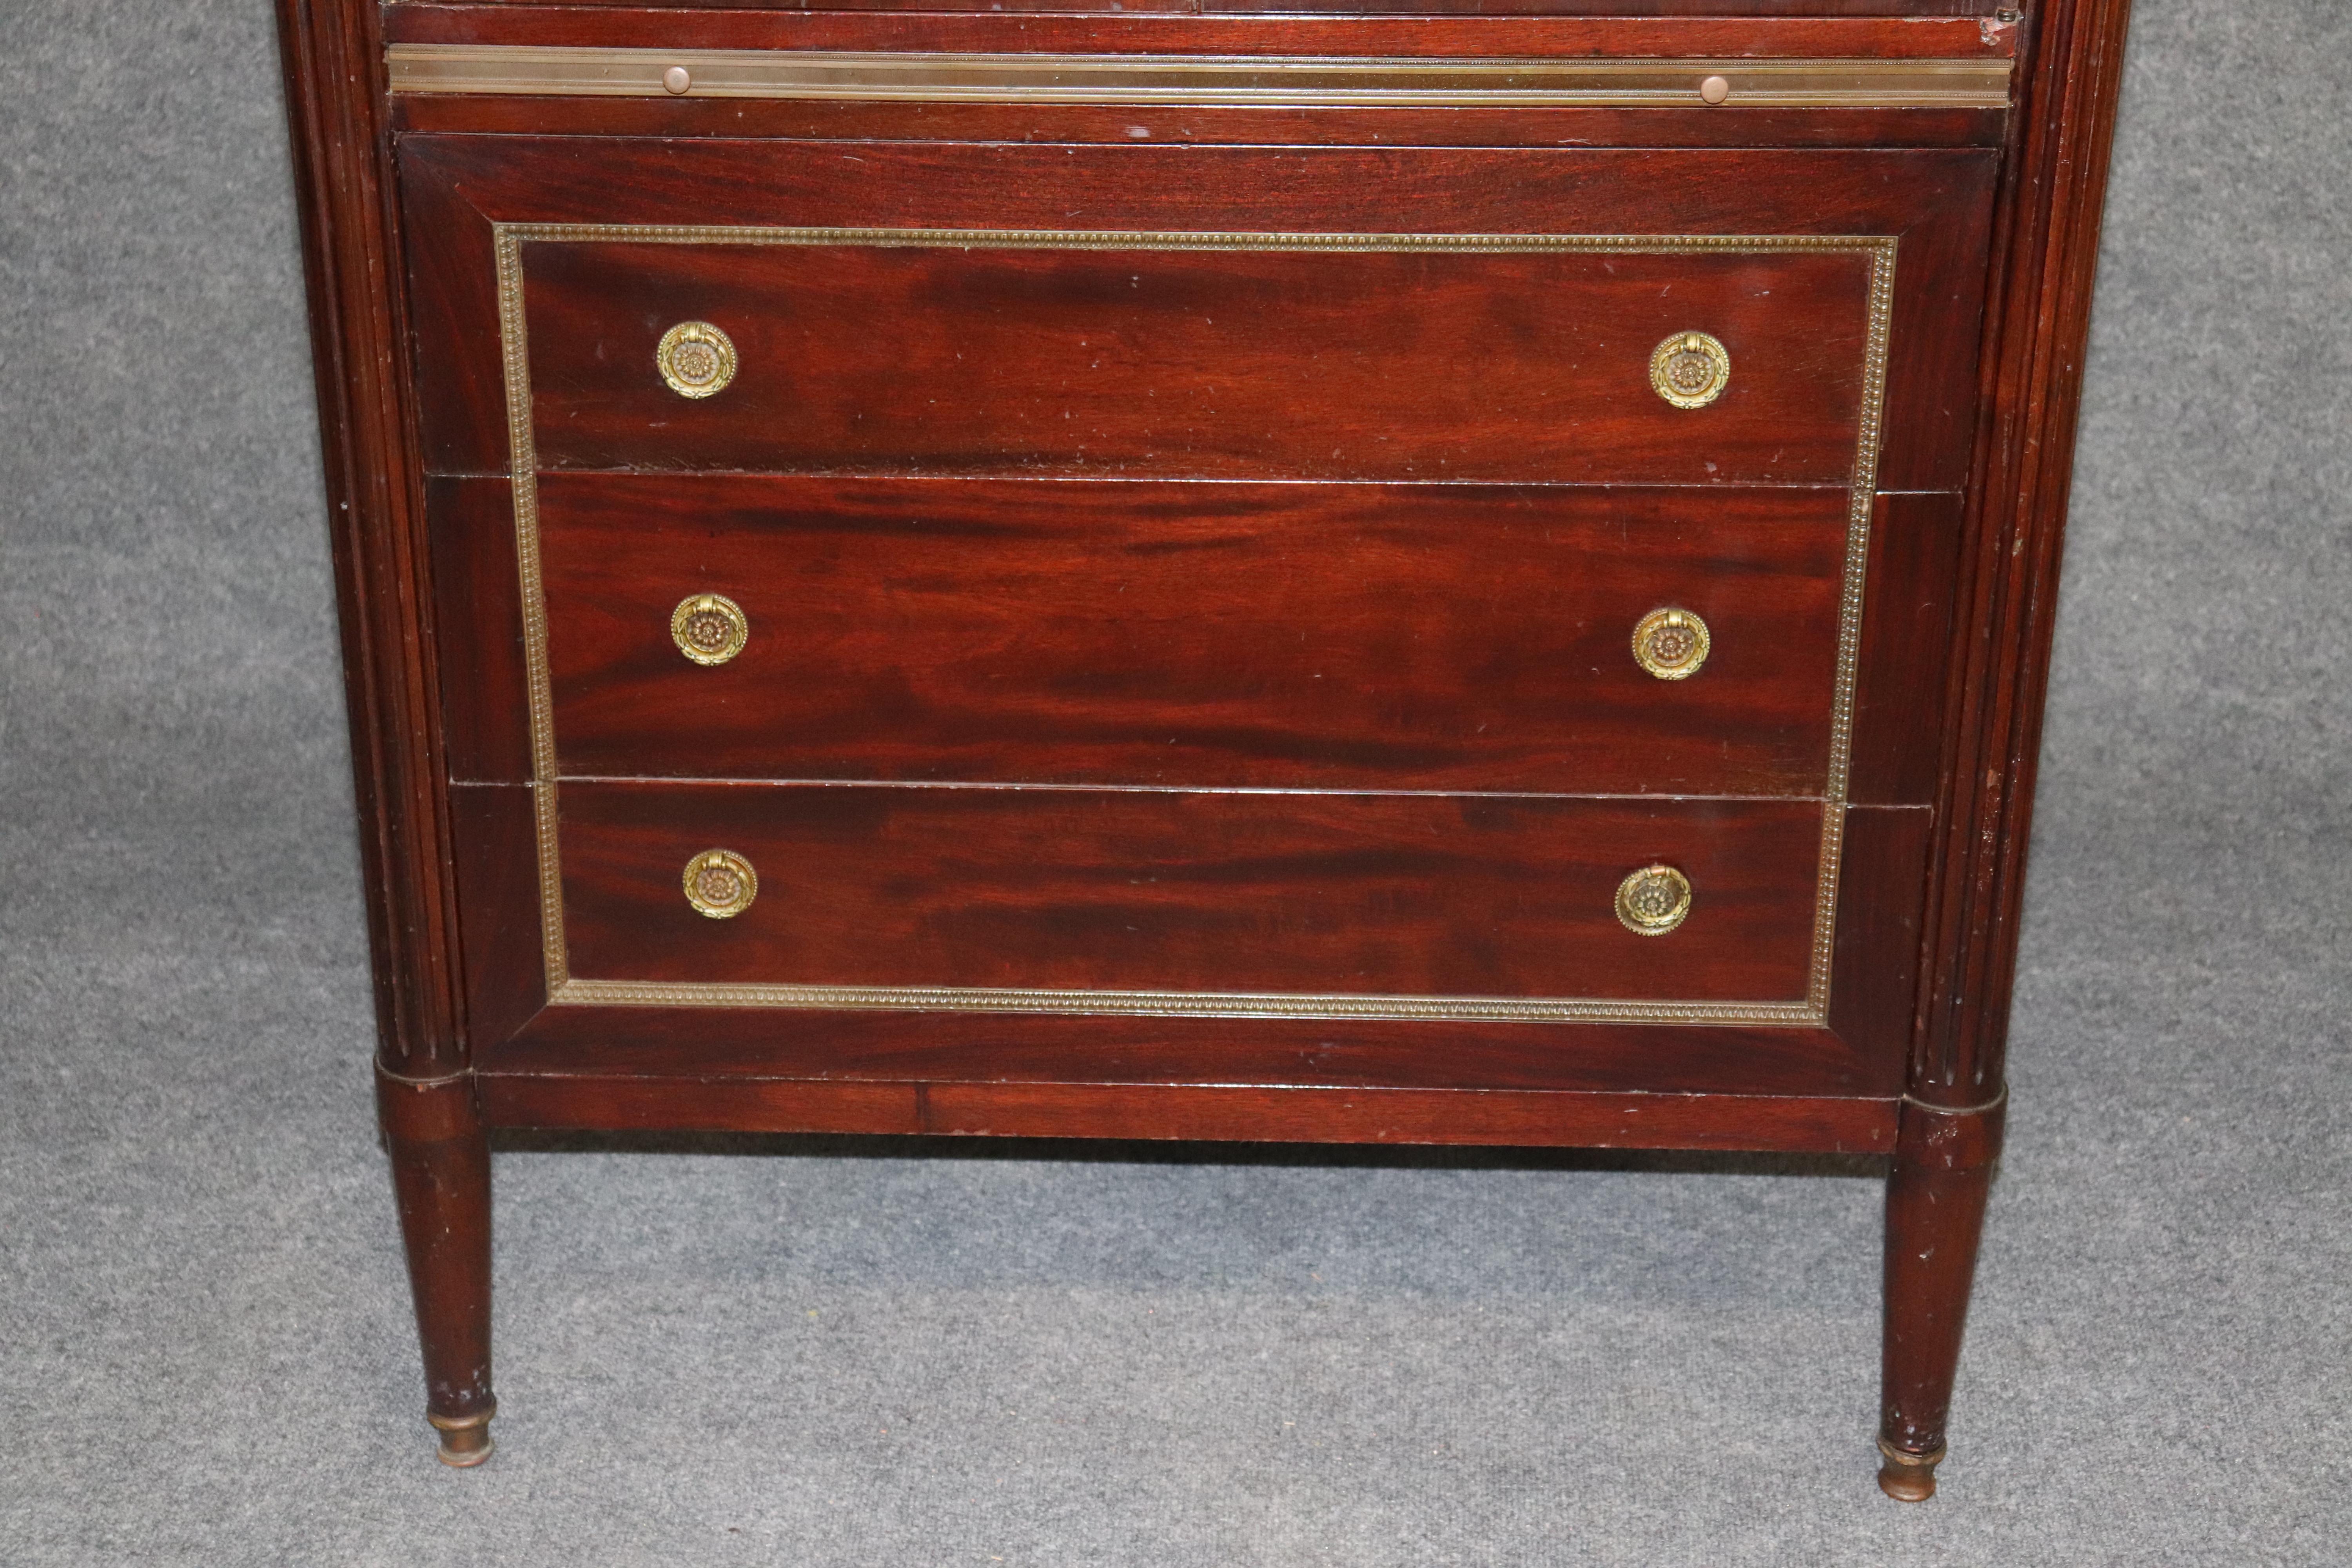 Solid Mahogany French Directoire Style Fitted Chiffarobe Gentleman's Dresser 1